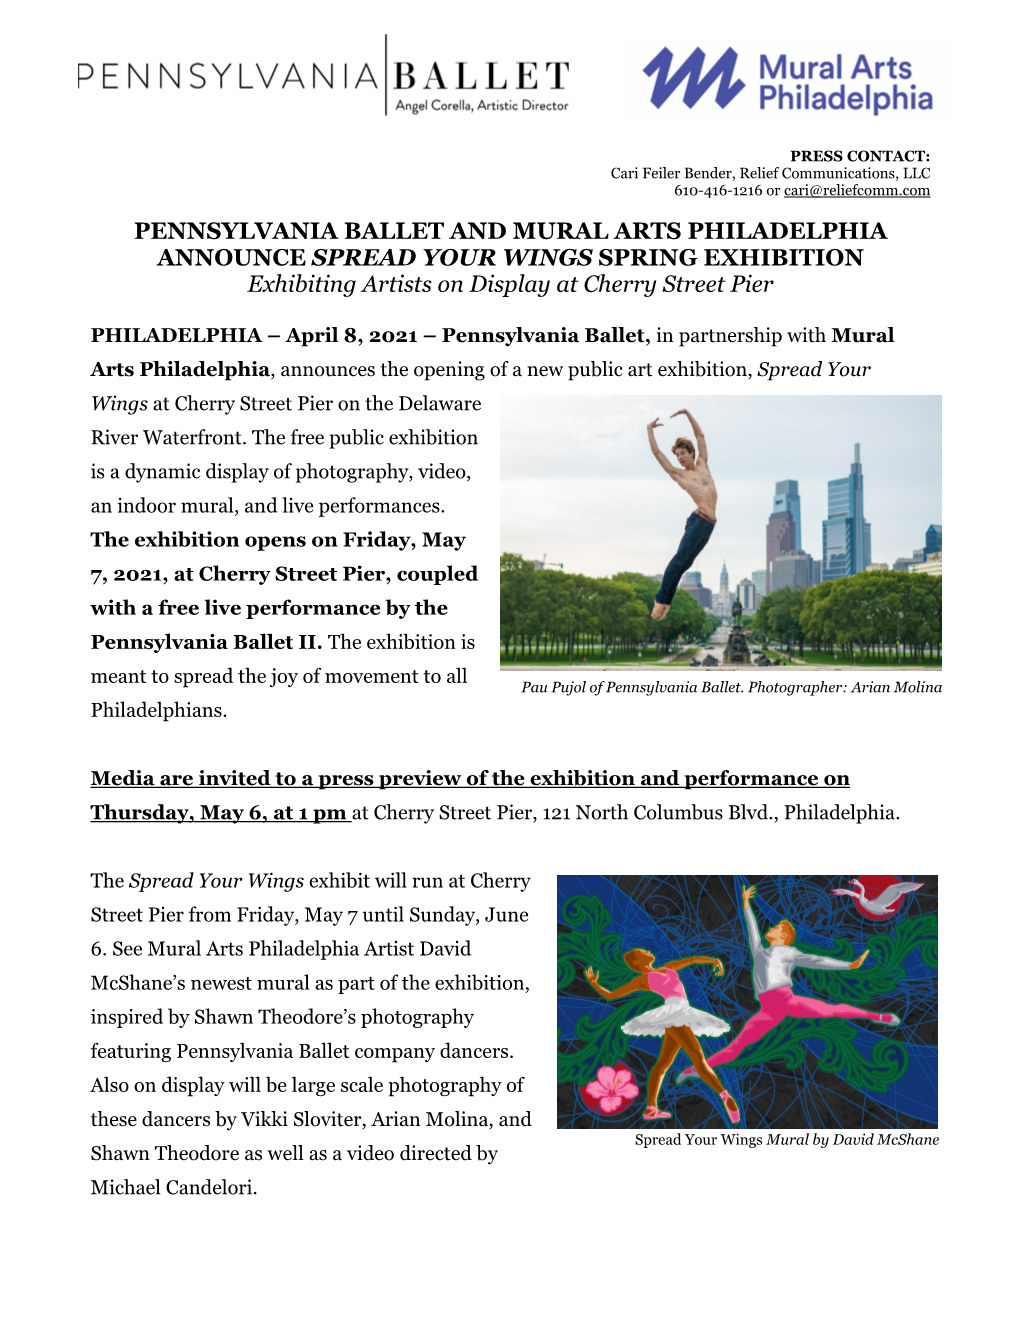 PENNSYLVANIA BALLET and MURAL ARTS PHILADELPHIA ANNOUNCE SPREAD YOUR WINGS SPRING EXHIBITION Exhibiting Artists on Display at Cherry Street Pier